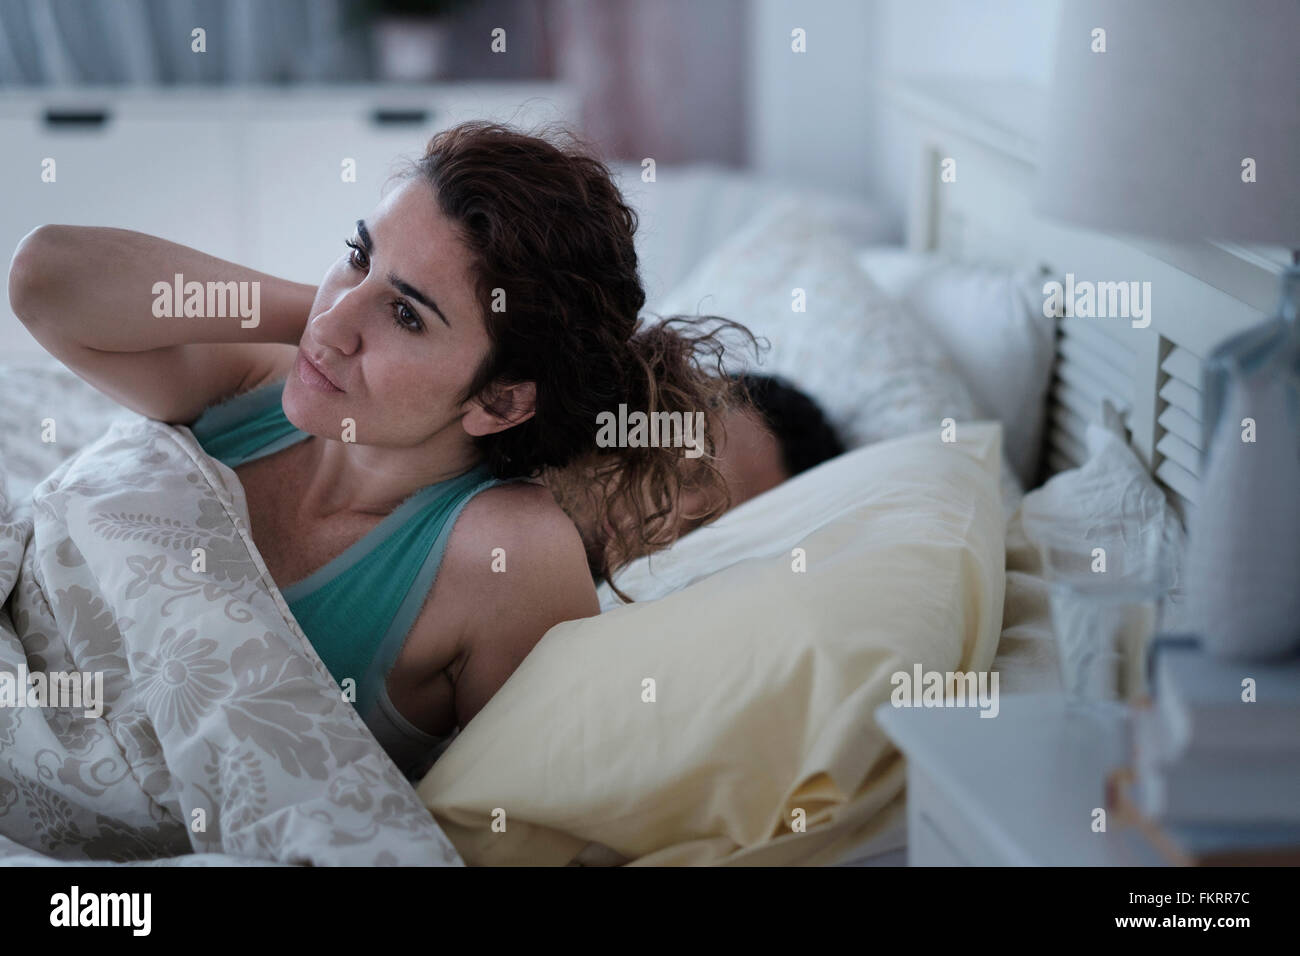 Woman rubbing her neck in bed Stock Photo